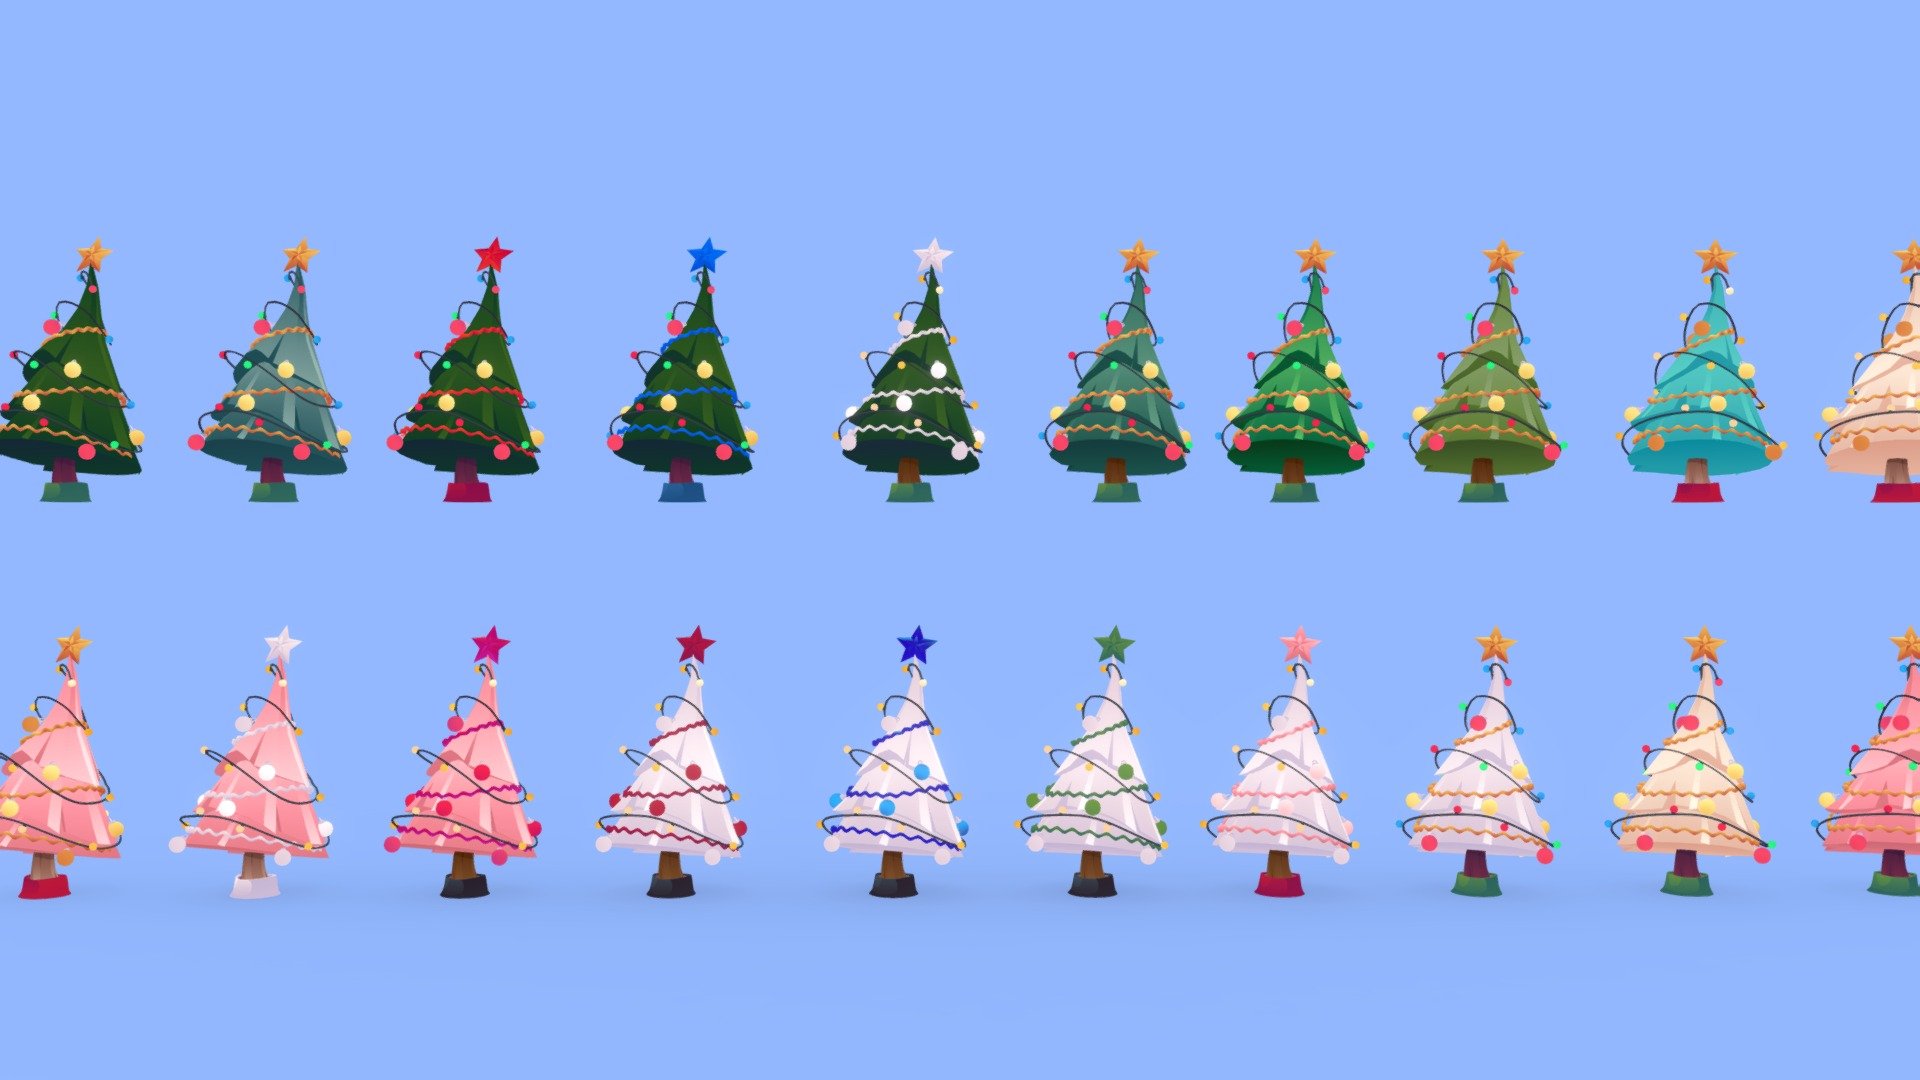 🎅🎄 Happy holidays! 🎄🎅

Spice up your christmas special in your game with this cute 20 christmas trees, use it in your render scenes and games.
Textured with gradient atlas, so it is performant for mobile games and video games.

Like a few of my other assets in the same style, it uses a single texture diffuse map and is mapped using only color gradients. All gradient textures can be extended and combined to a large atlas.

There are more assets in this style to add to your game scene or environment. Check out my sale.

If you want to change the colors of the assets, you just need to move the UVs on the atlas to a different gradient. Or contact me for changes, for a small fee.

-------------Terms of Use--------------

Commercial use of the assets provided is permitted but cannot be included in an asset pack or sold at any sort of asset/resource marketplace 3d model